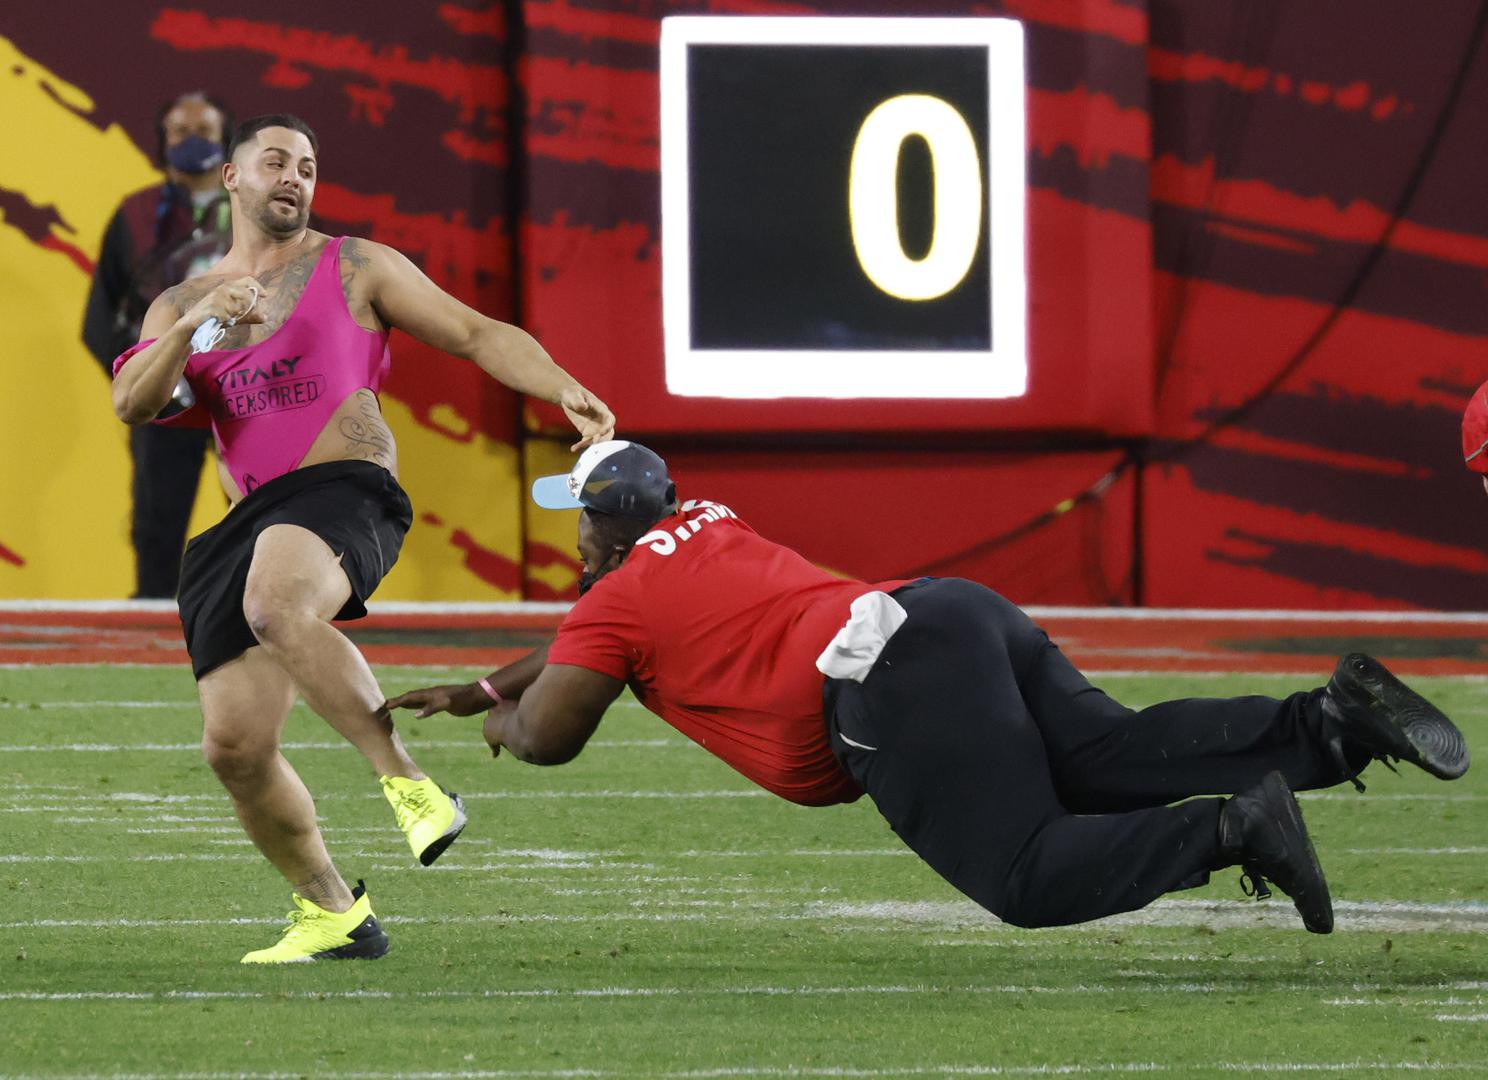 A fan is tackled by security personnel as he runs on to the field during the fourth quarter of Super Bowl LV at Raymond James Stadium in Tampa, Florida on Sunday, February 7, 2021.   Photo by John Angelillo/UPI Photo via Newscom Newscom/PIXSELL